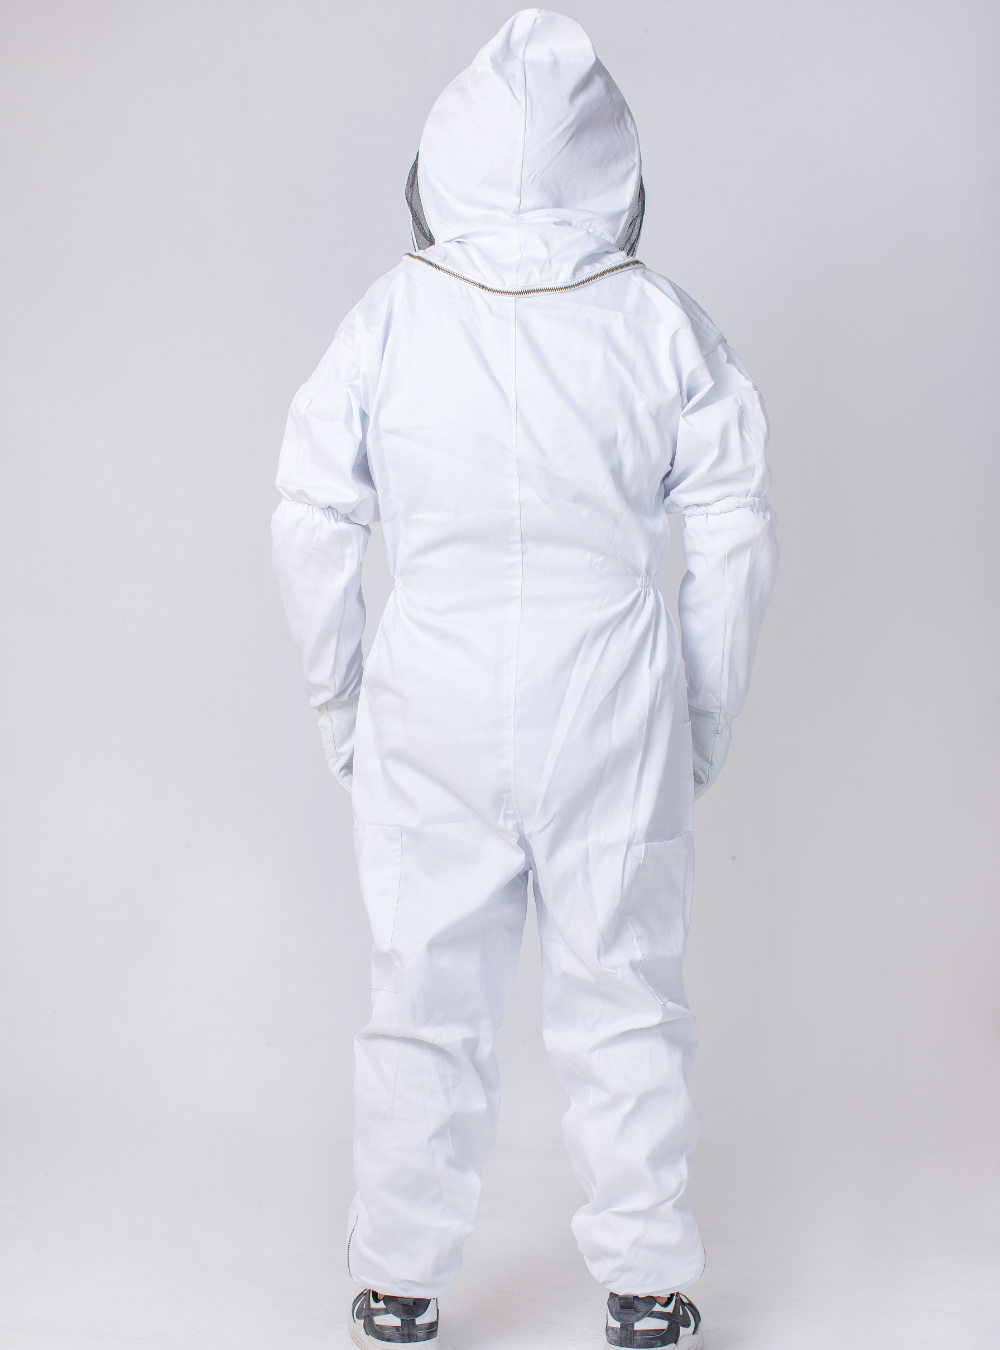 Beekeeper in a WhiteGuard Fencing Beekeeper Suit, crafted from high-quality cotton for durability, complete with a round fencing veil for face protection Back look.